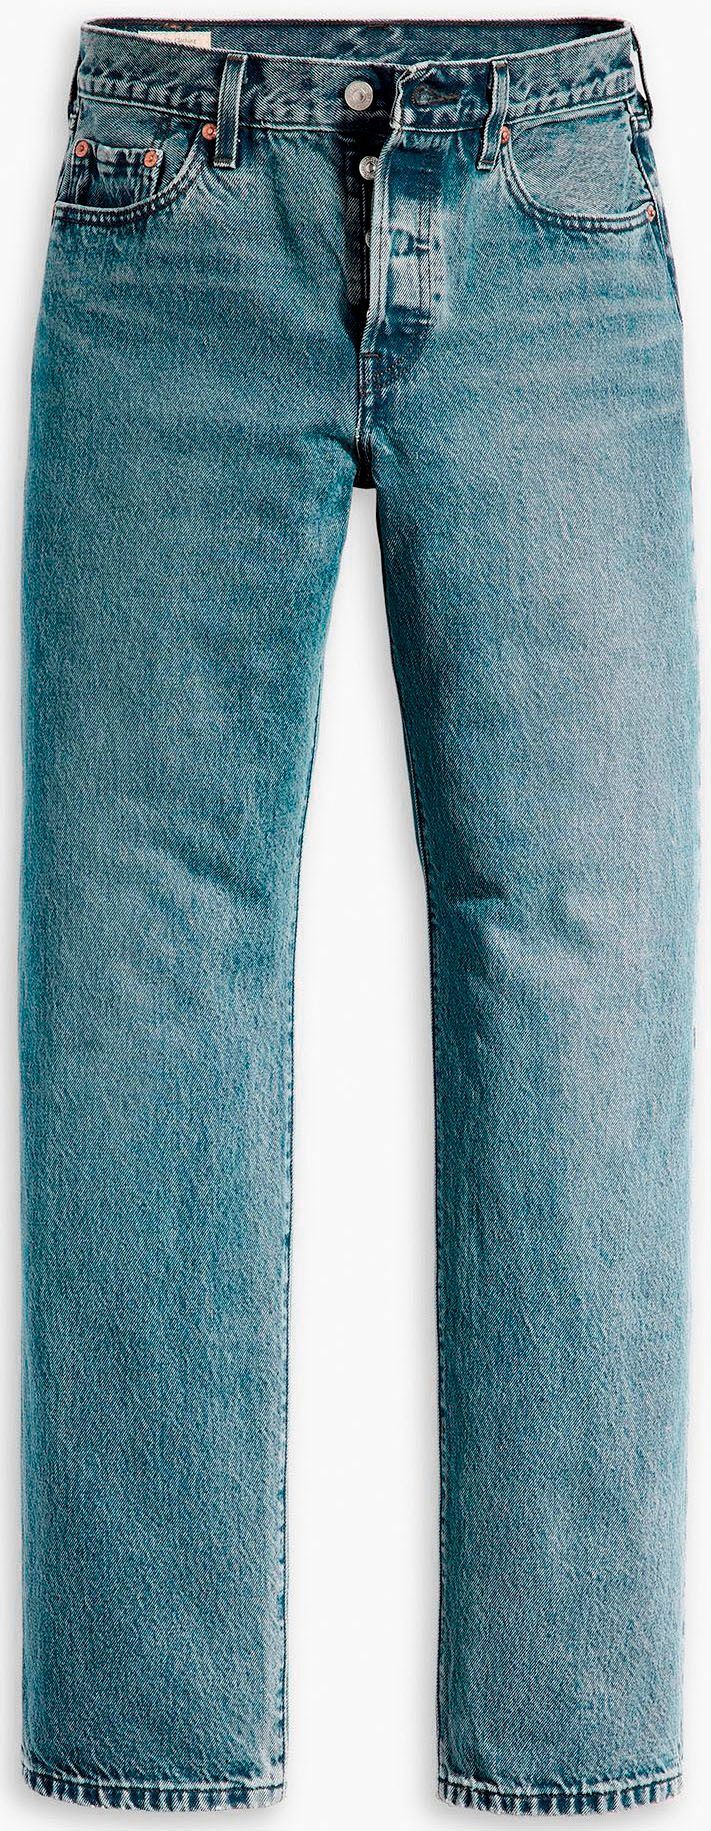 Levi's® Weite multi Collection 501 90'S denim 501 Jeans